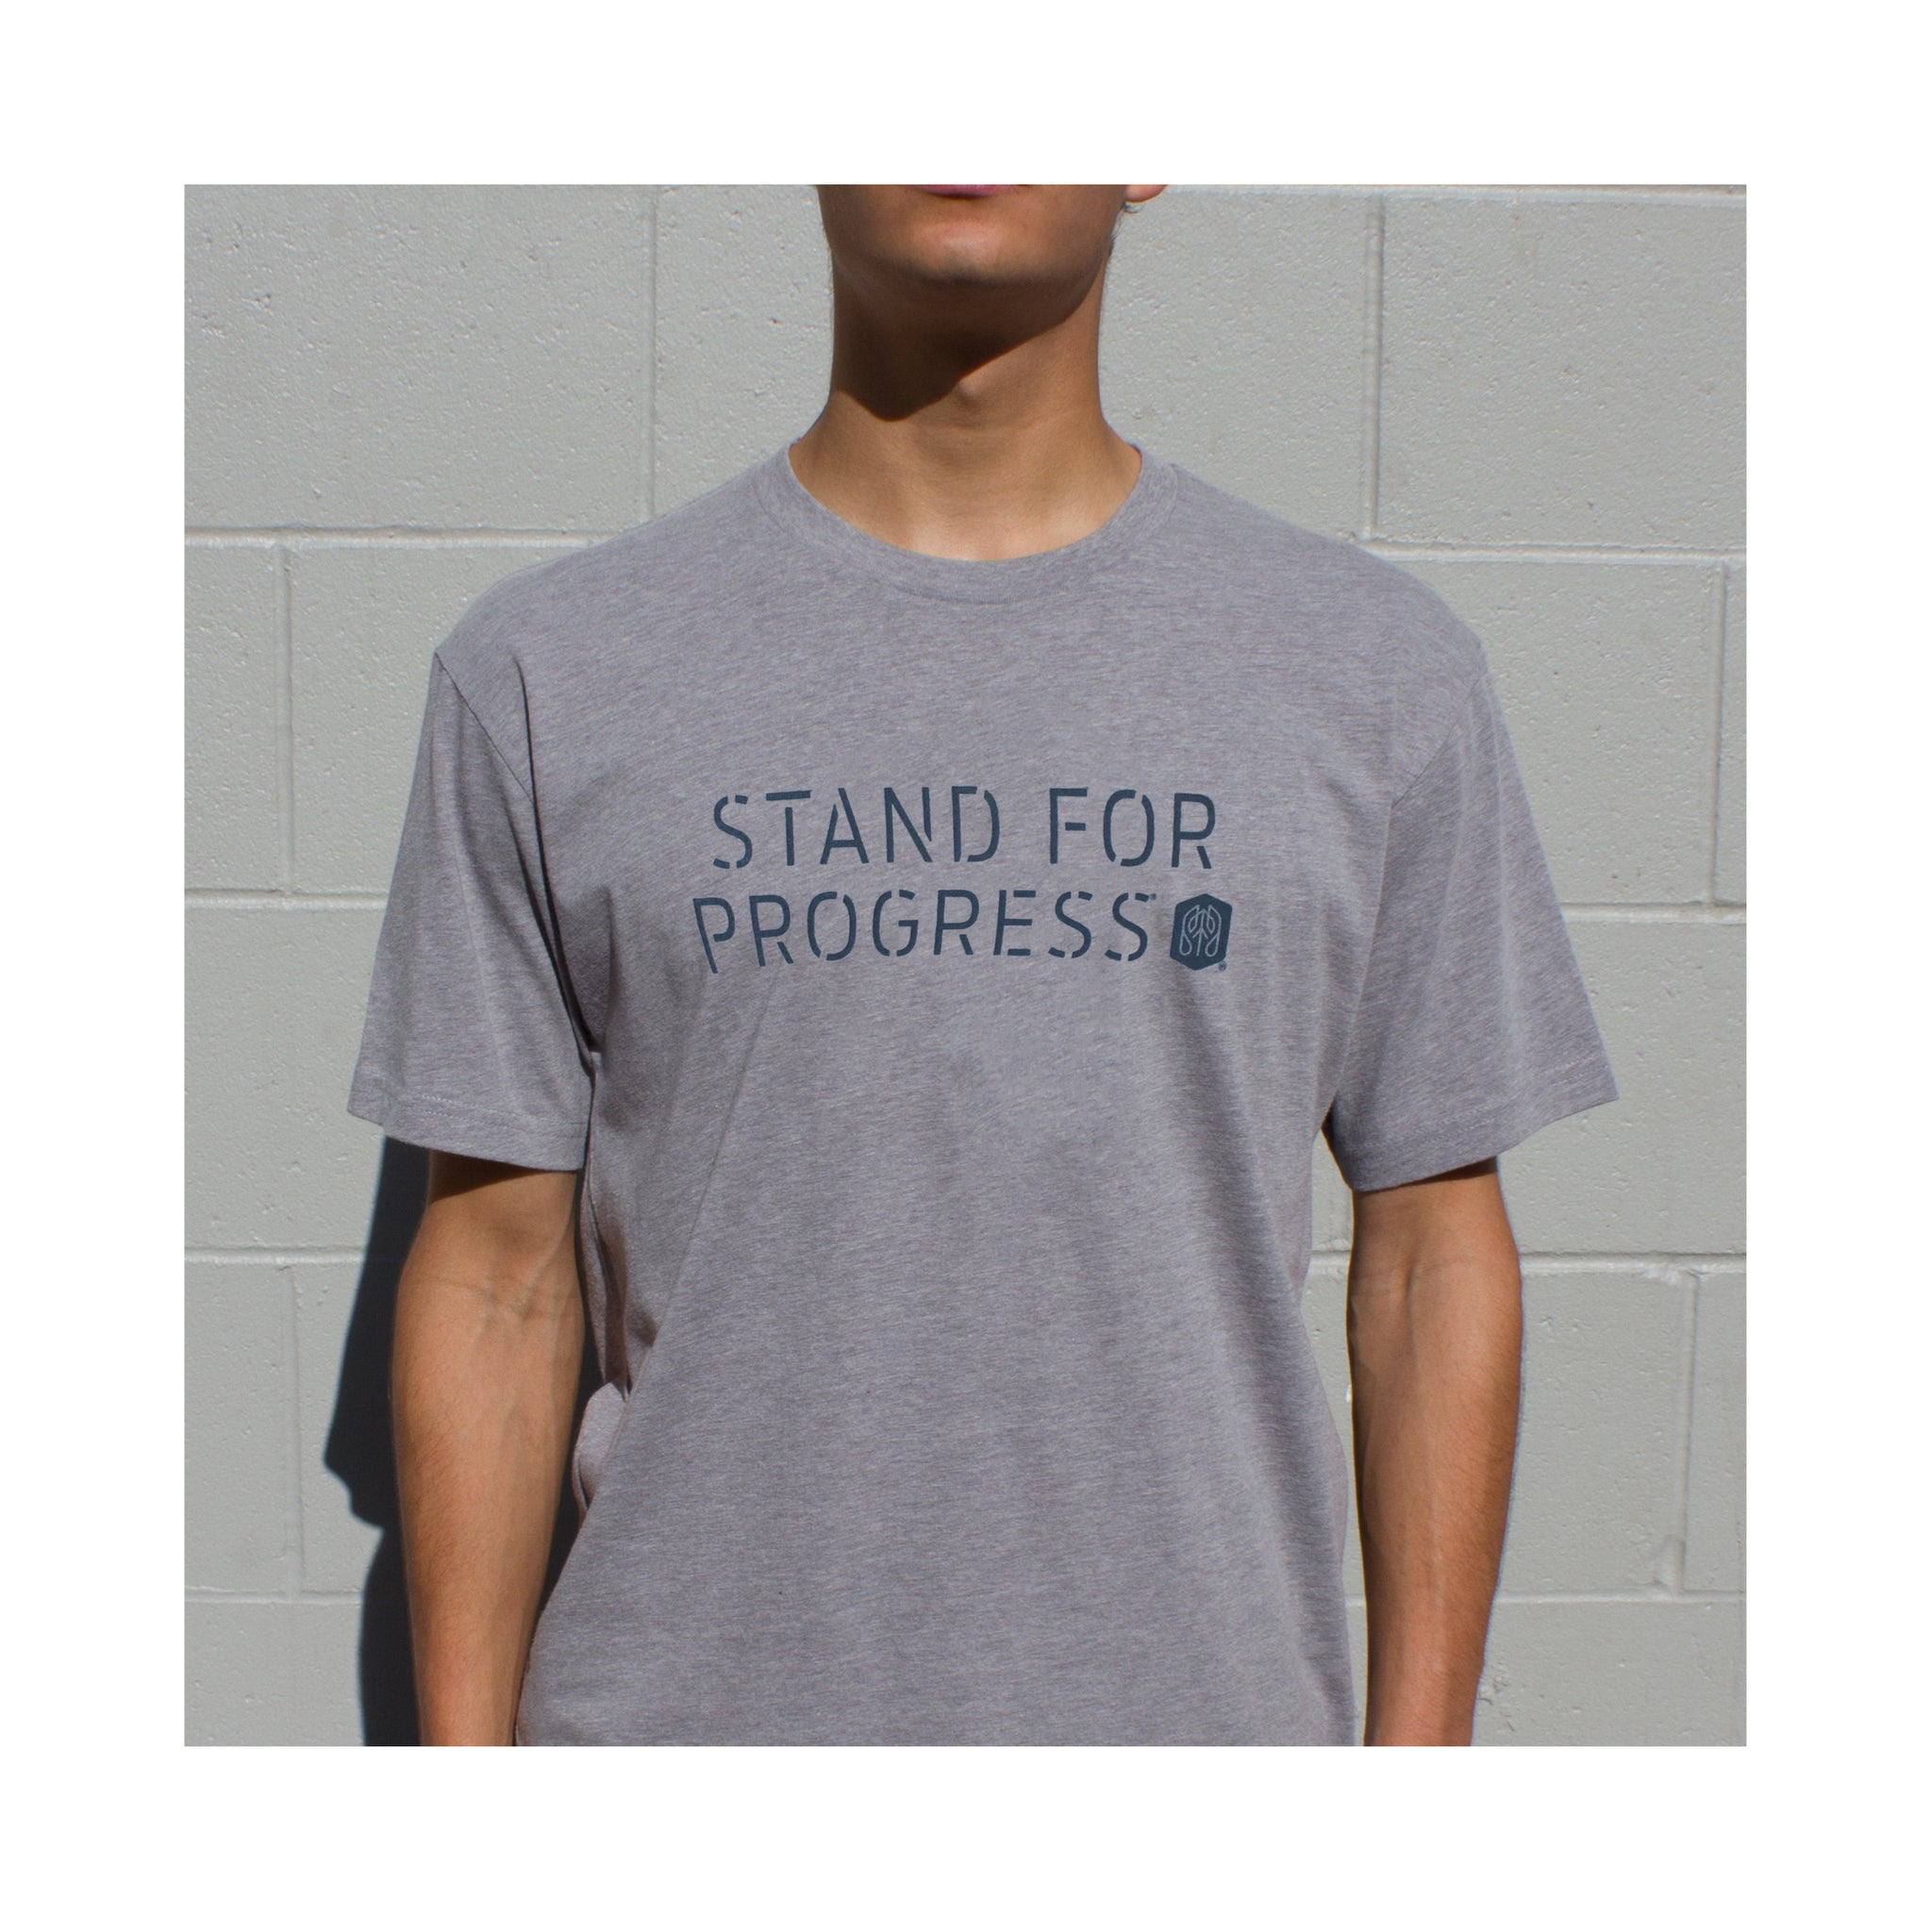 Dark_Heather_Gray - Stand For Progress T shirt Front on Model